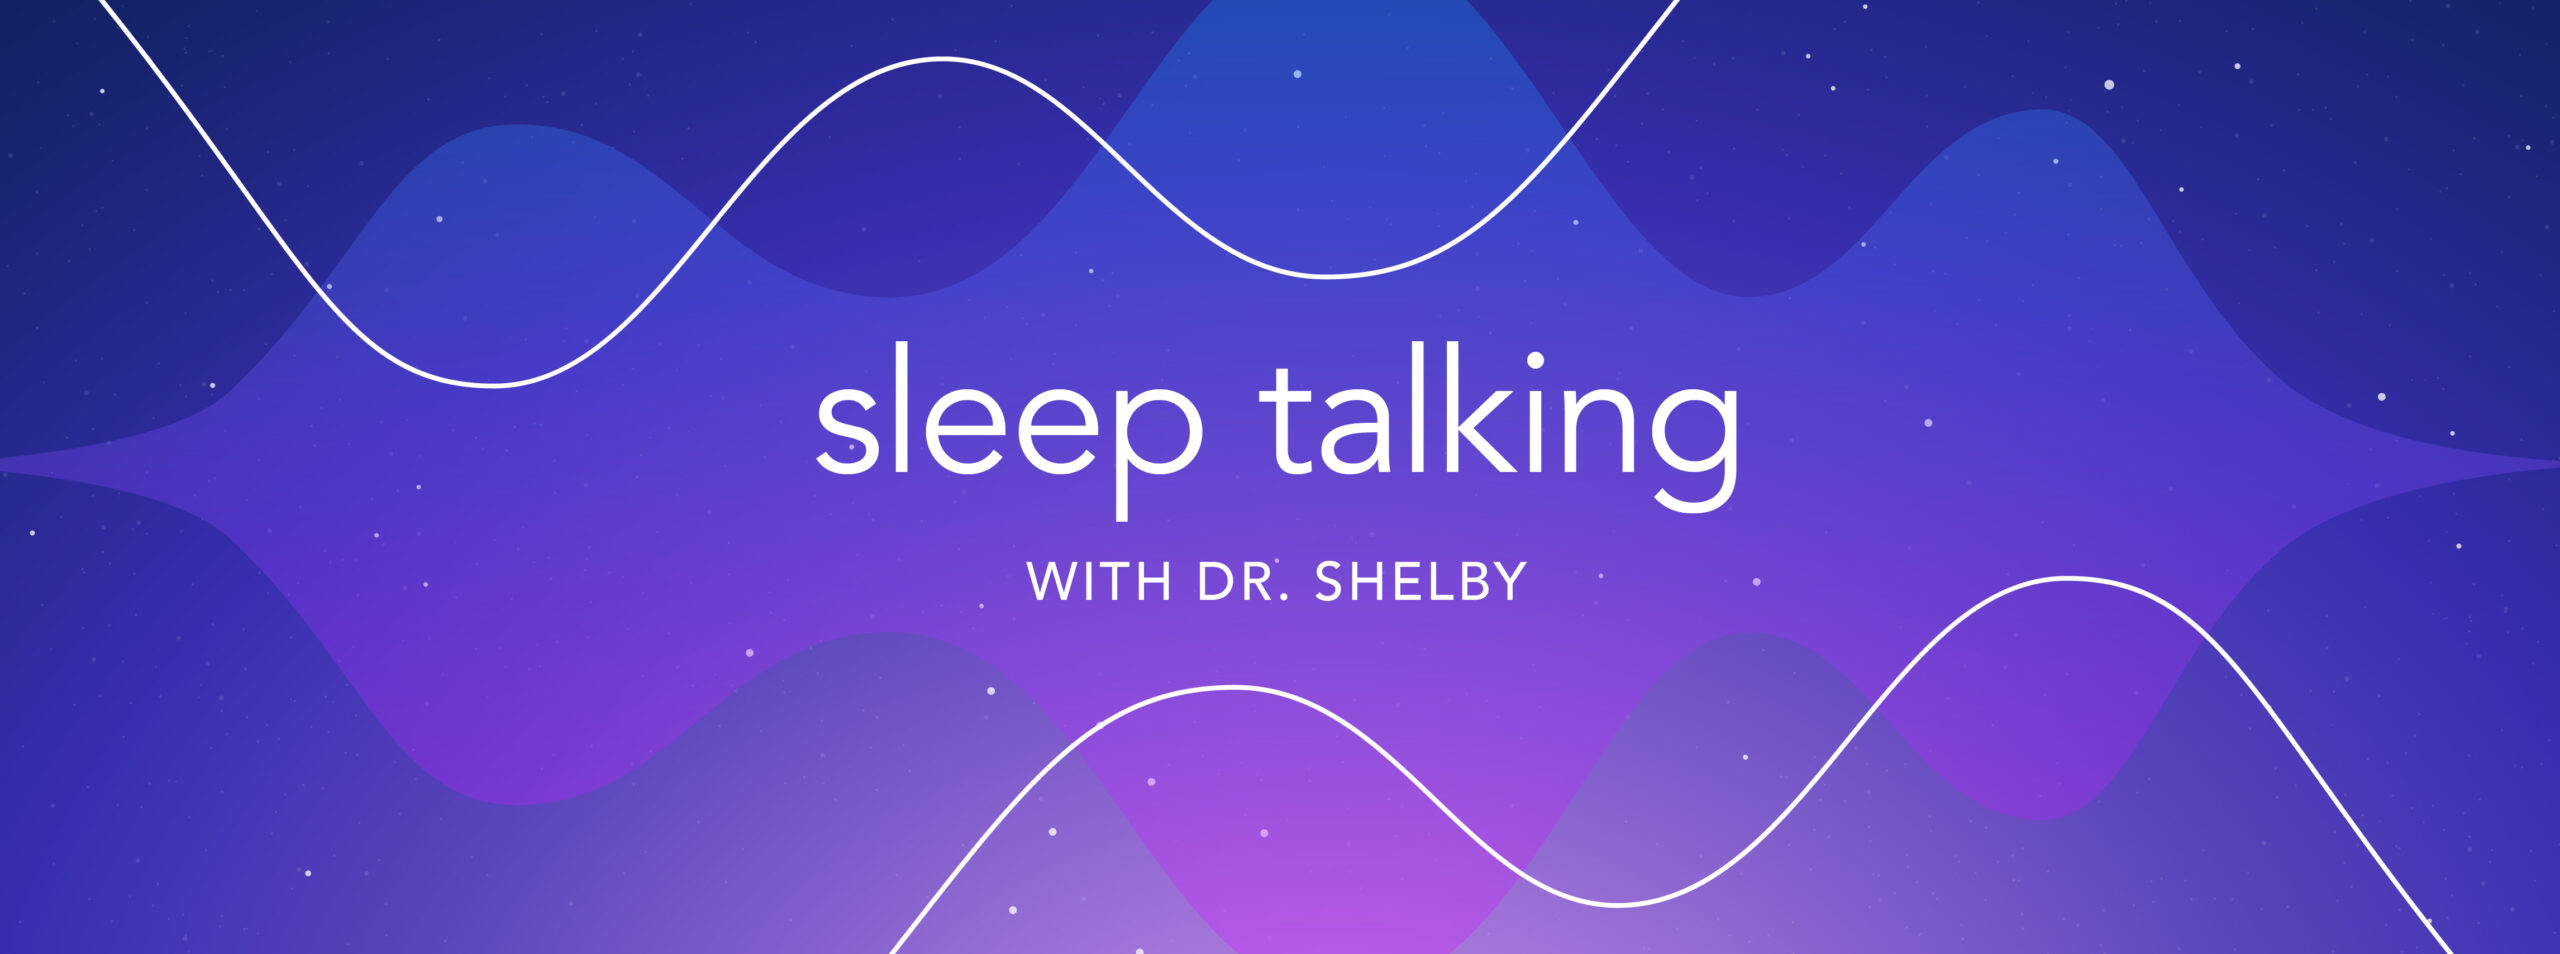 Podcast - Sleep Research roundup